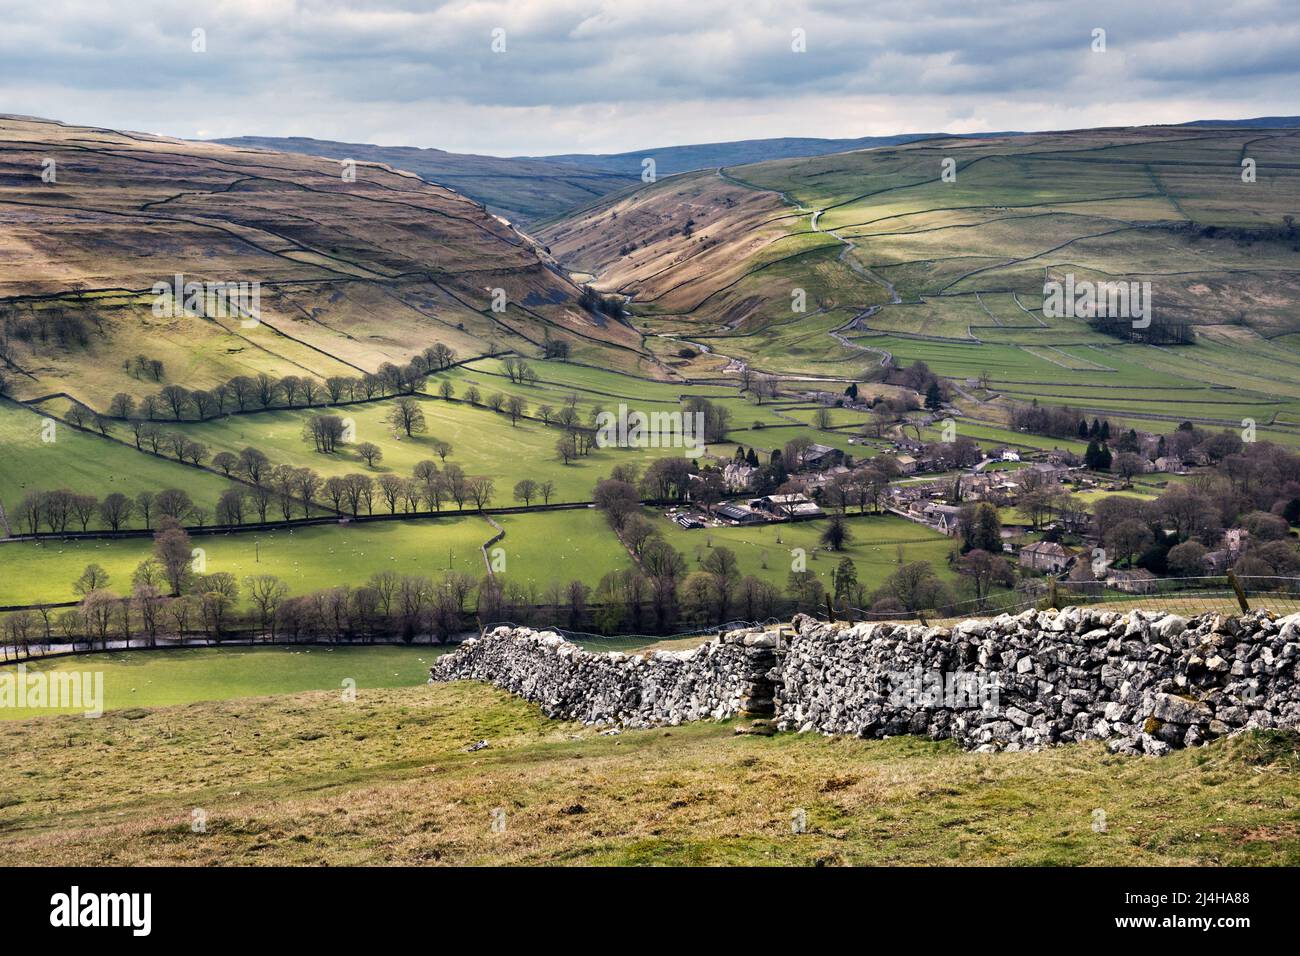 Arncliffe village in Littondale, Yorkshire Dales National Park. The village has been used for filming TV's 'Emmerdale' and 'All Creatures Great and Small'. Stock Photo